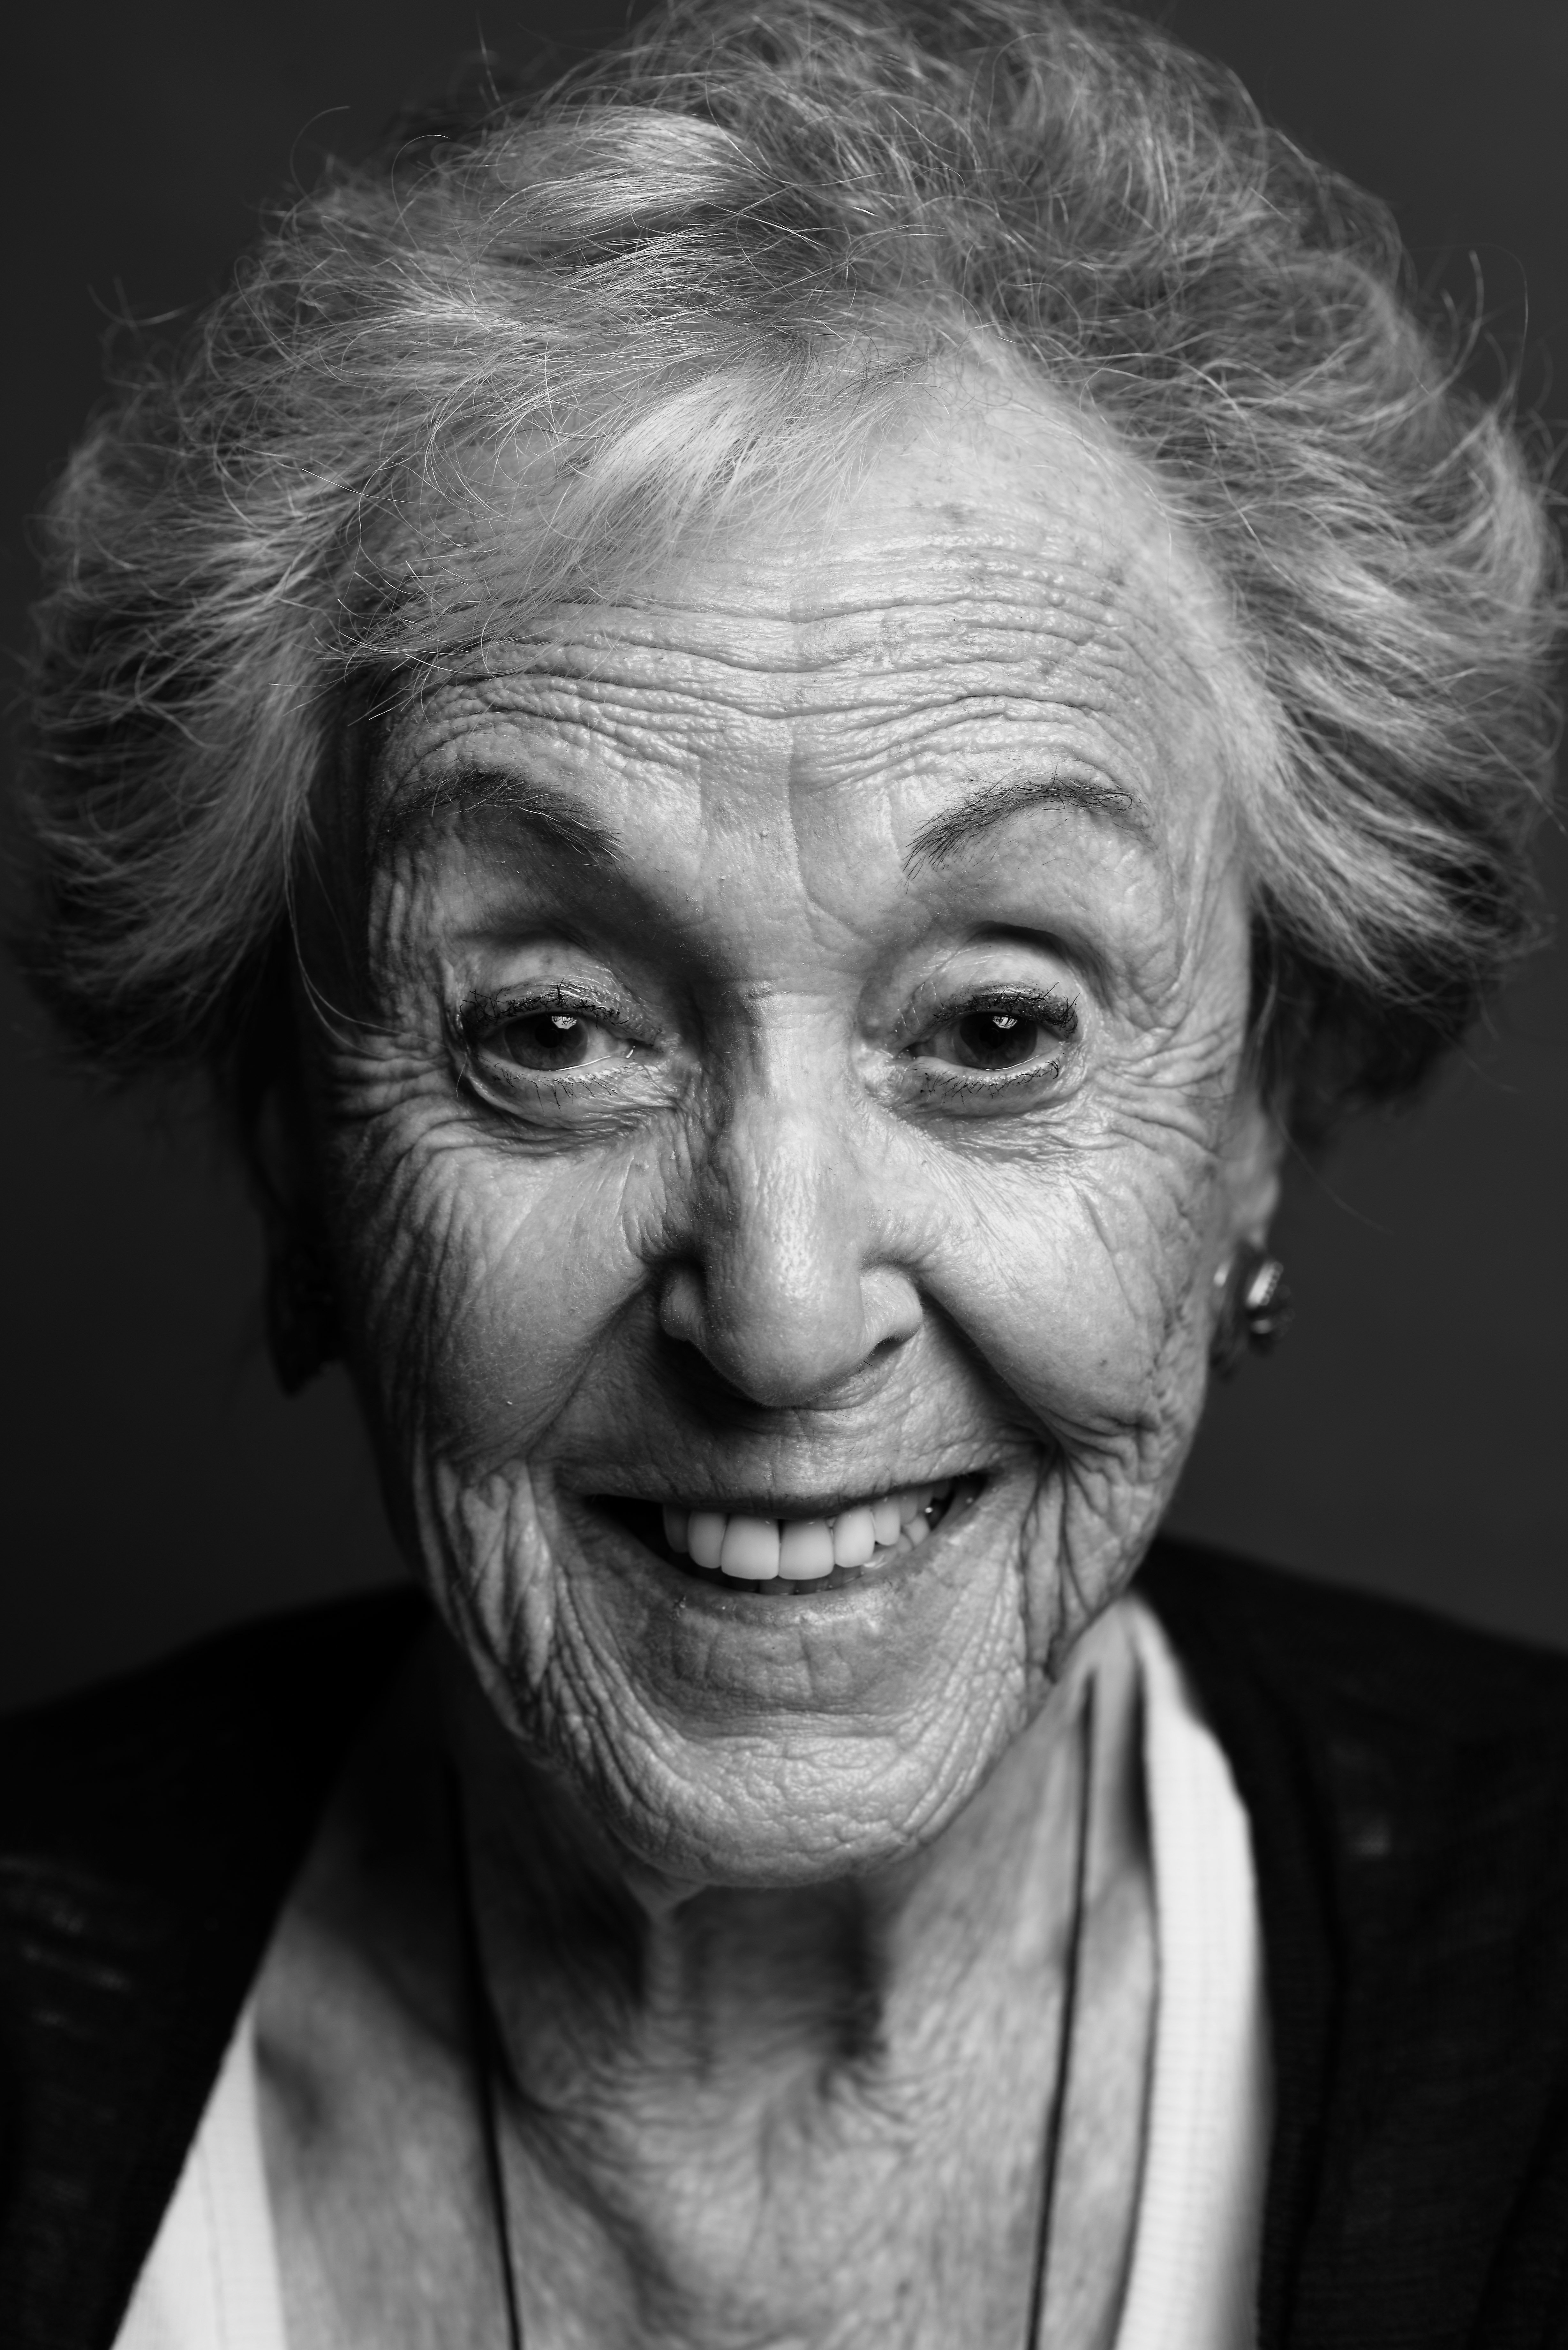 14 Women Show Off Wrinkles To Make A Potent Statement About Aging HuffPost Post 50